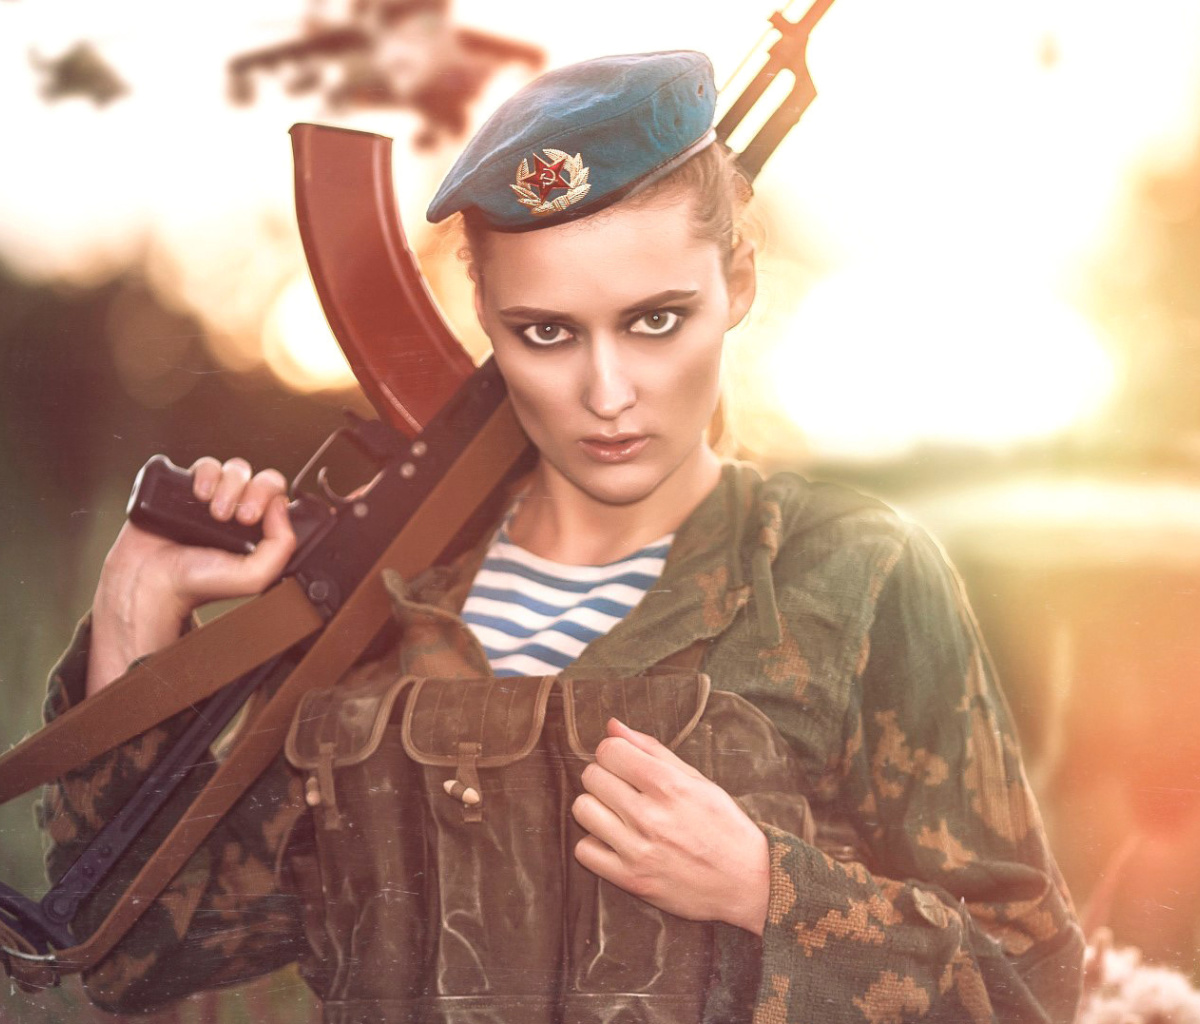 Russian Girl and Weapon HD wallpaper 1200x1024